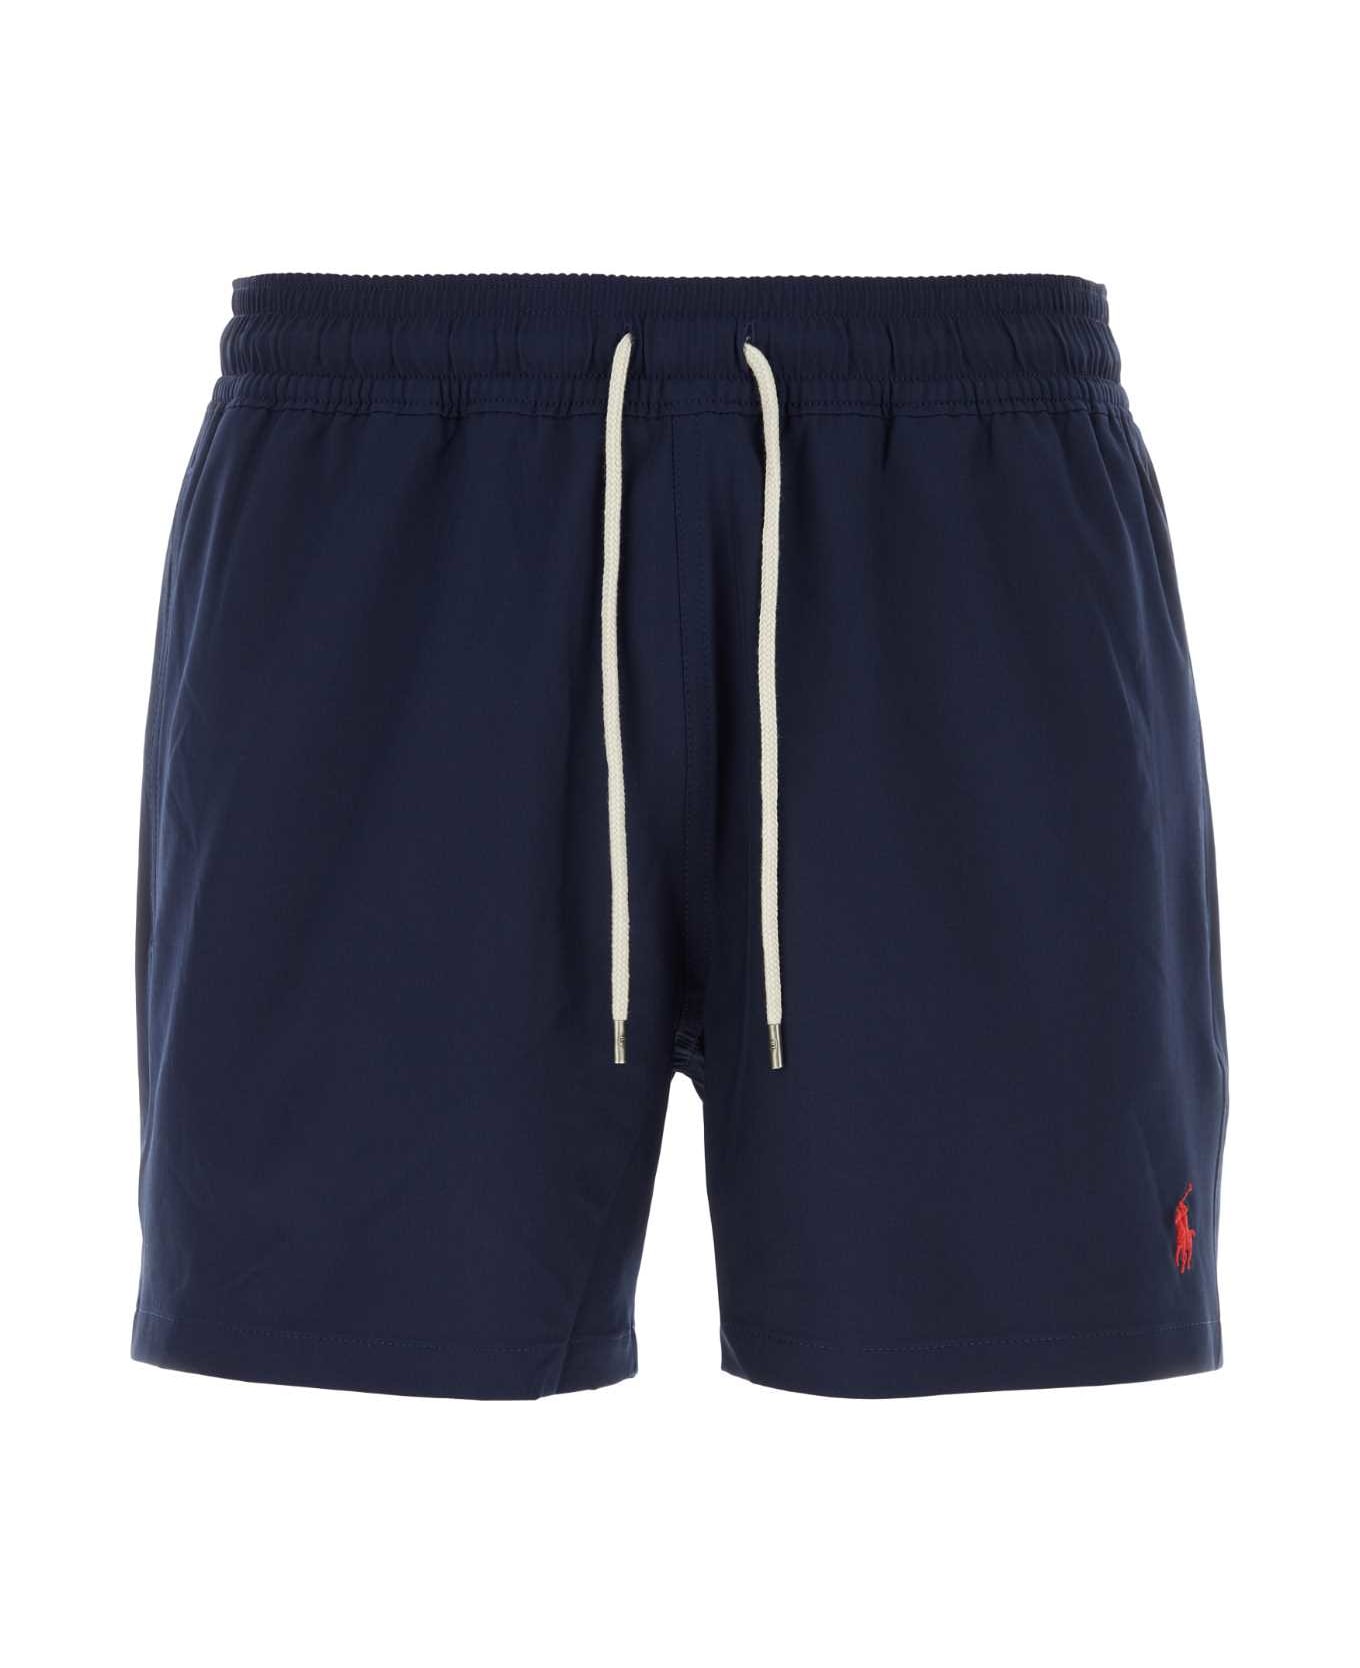 Polo Ralph Lauren Navy Blue Stretch Polyester Swimming Shorts - 004